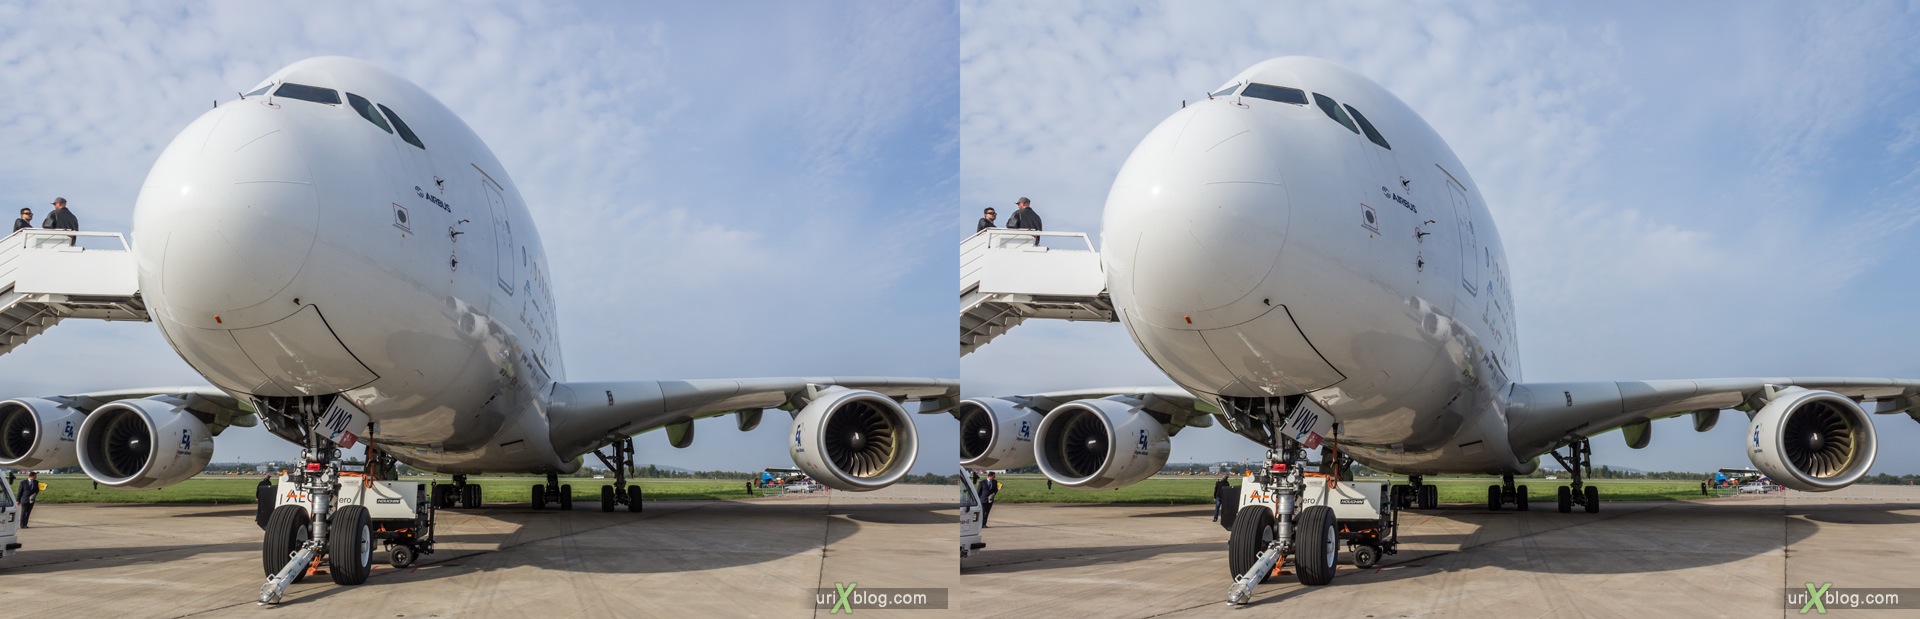 2013, Airbus A-380, MAKS, International Aviation and Space Salon, Russia, Ramenskoye airfield, airplane, 3D, stereo pair, cross-eyed, crossview, cross view stereo pair, stereoscopic